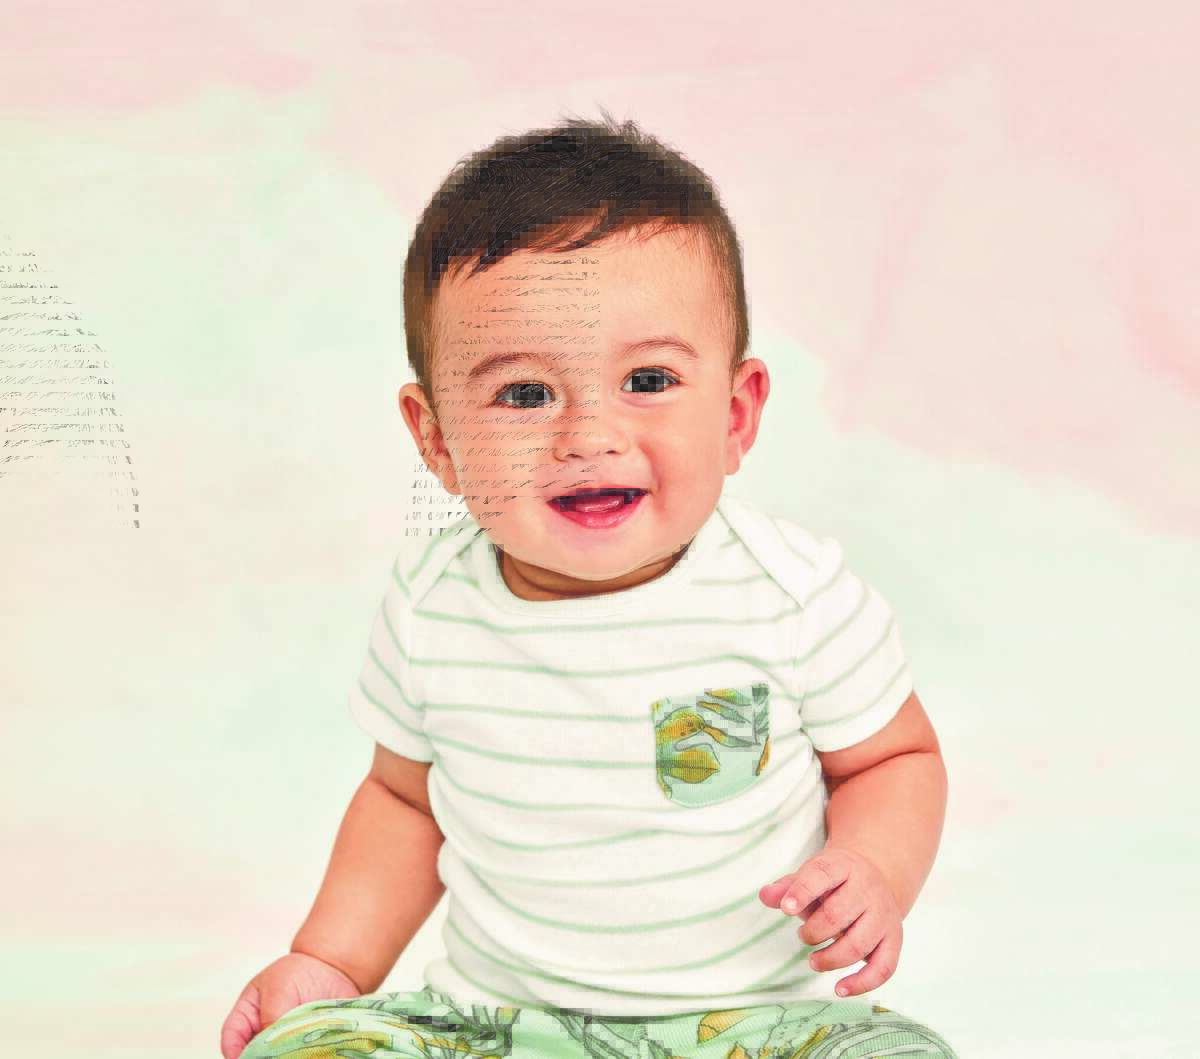 Ten-month-old Leonardo Munoz from Houston has been named Carter's 2023 Baby of the Year. 